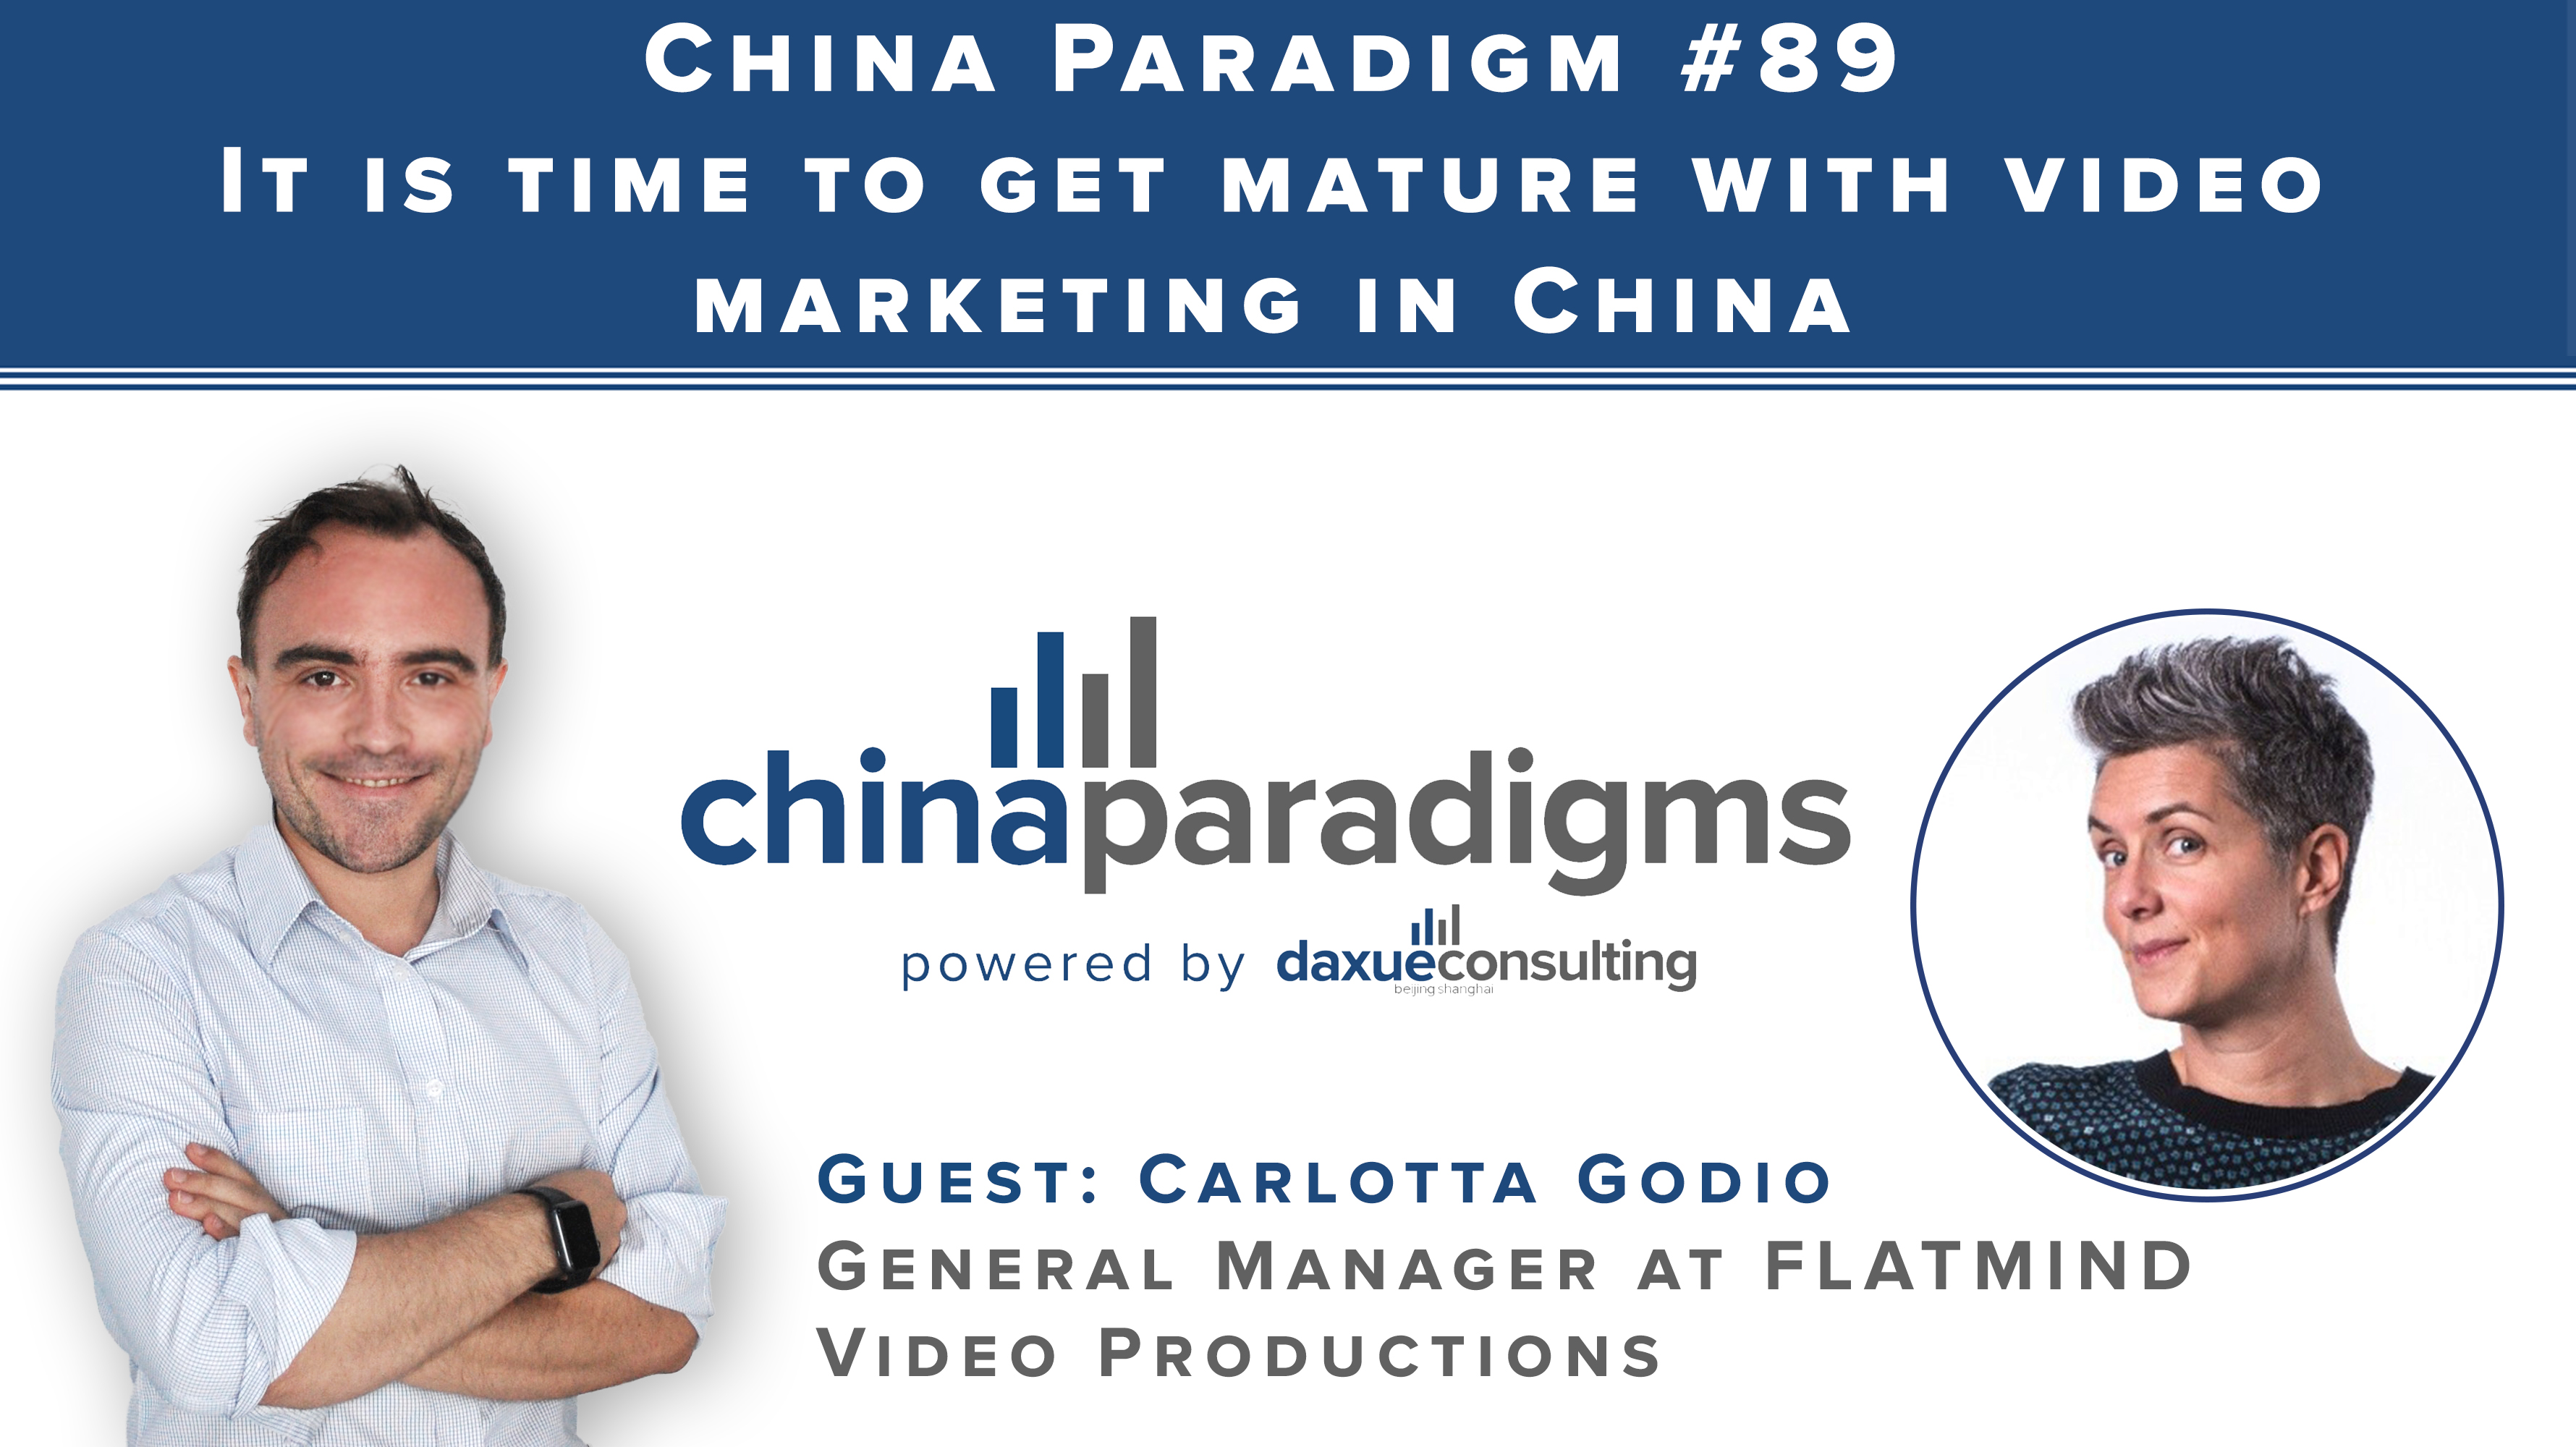 China Paradigm 89: It is time to get mature with video marketing in China